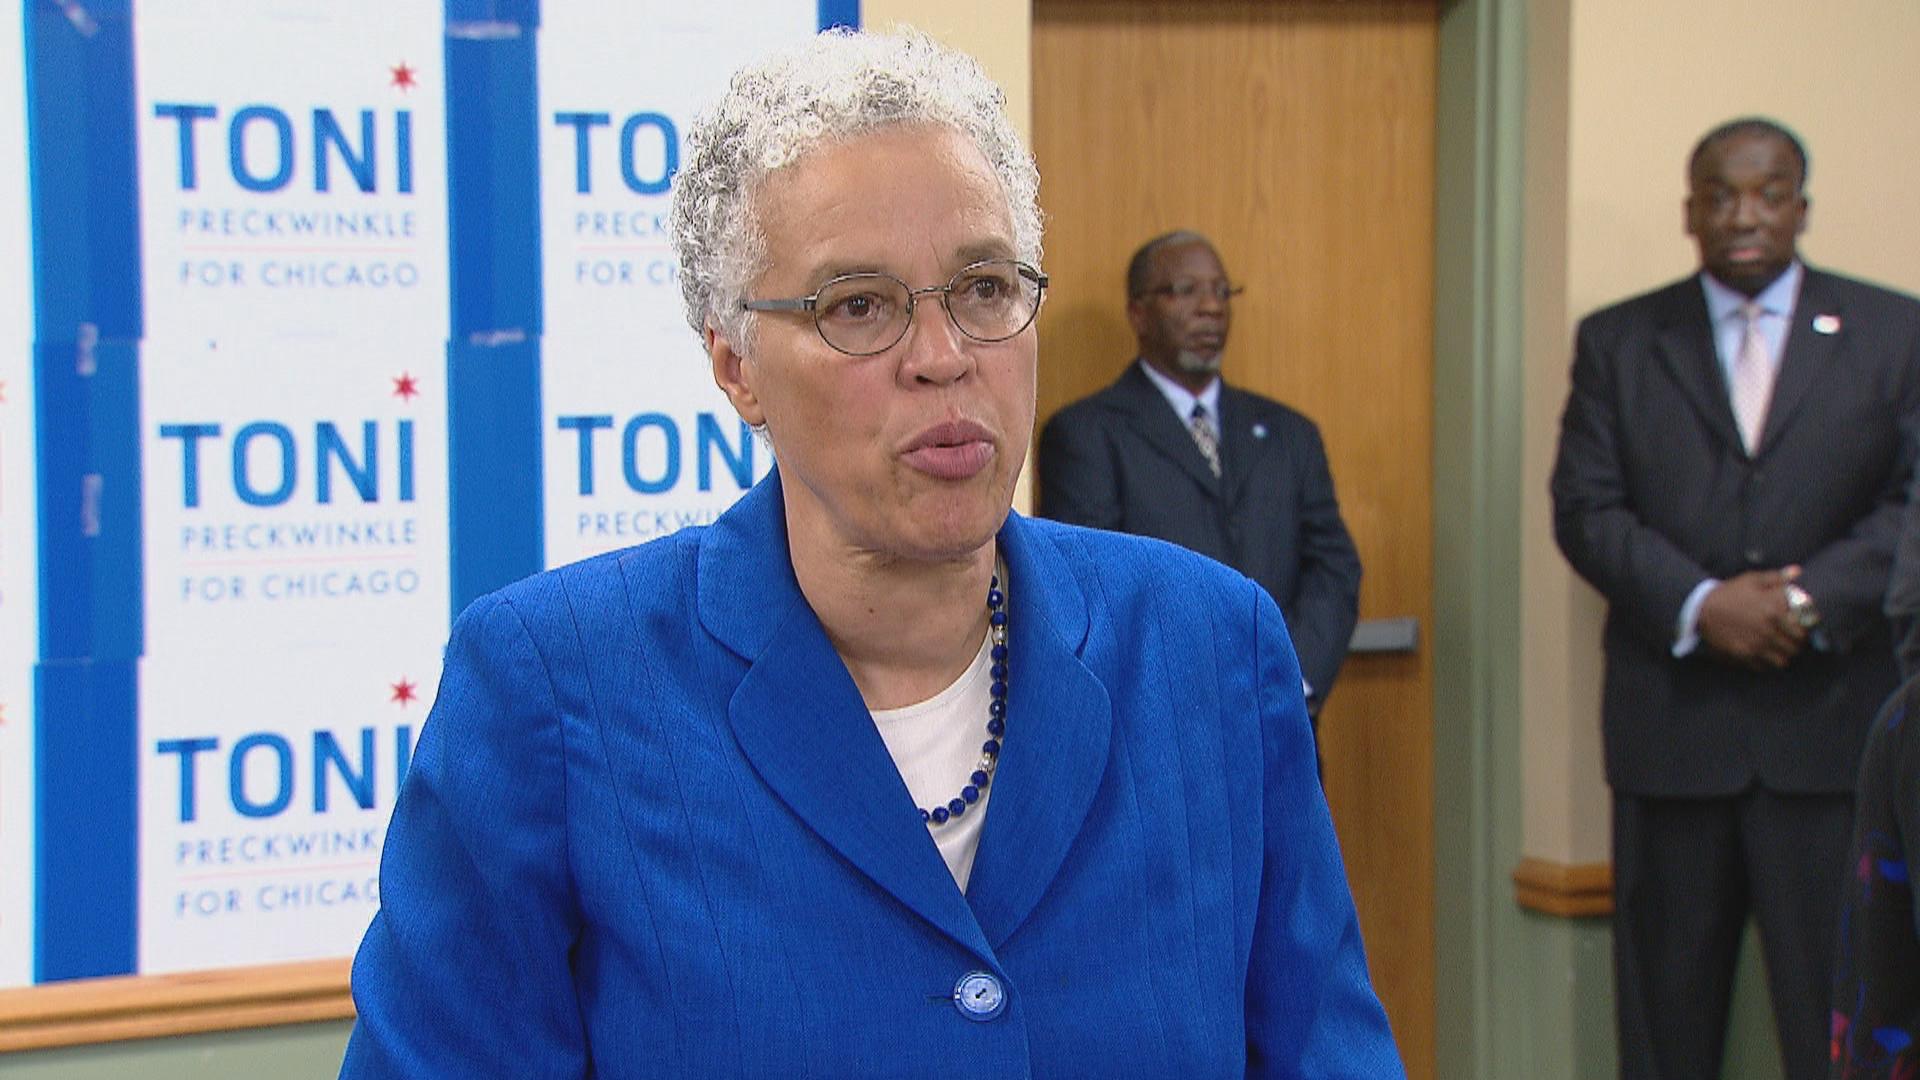 Cook County Board President Toni Preckwinkle takes questions from the media after announcing her mayoral campaign on Thursday, Sept. 20, 2019. (Chicago Tonight)